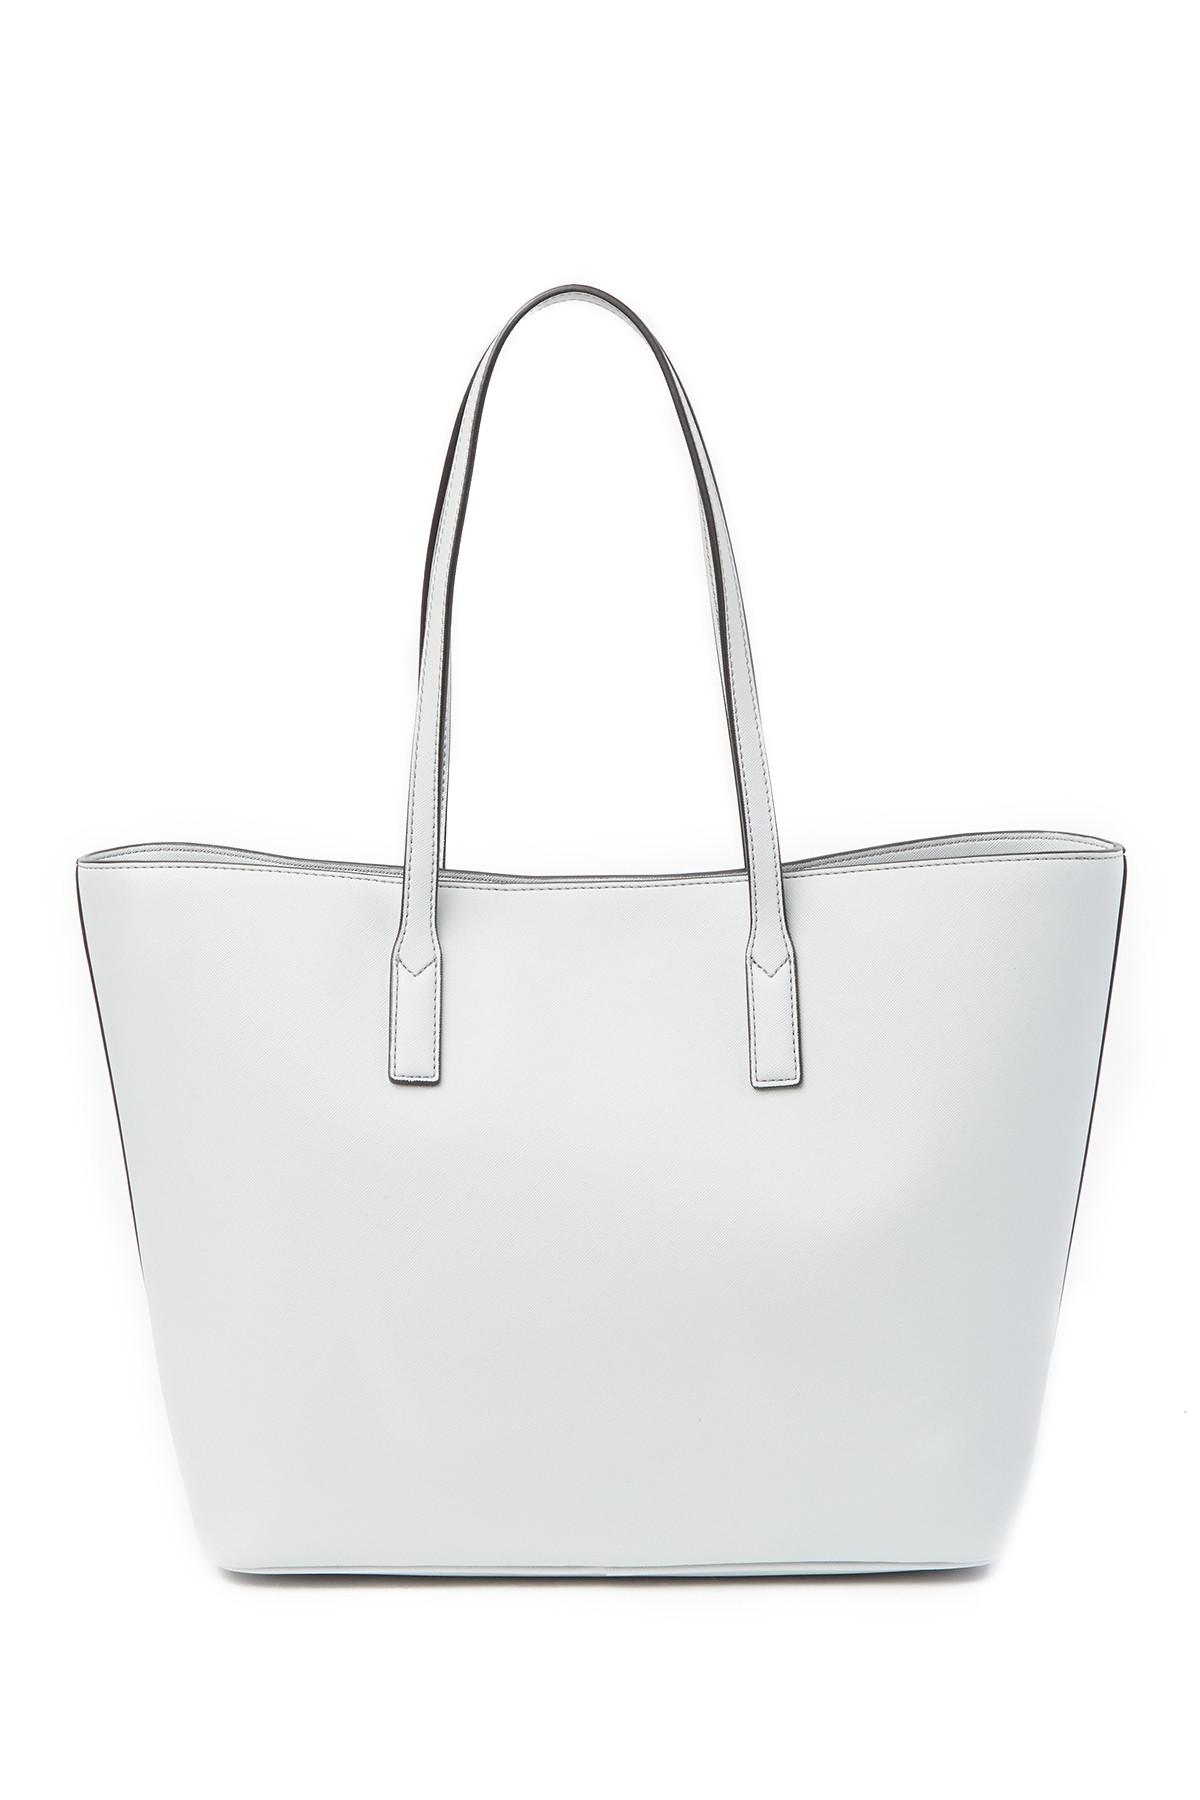 Marc Jacobs Luggage Tag Tote Bag in Light Grey (Gray) - Lyst